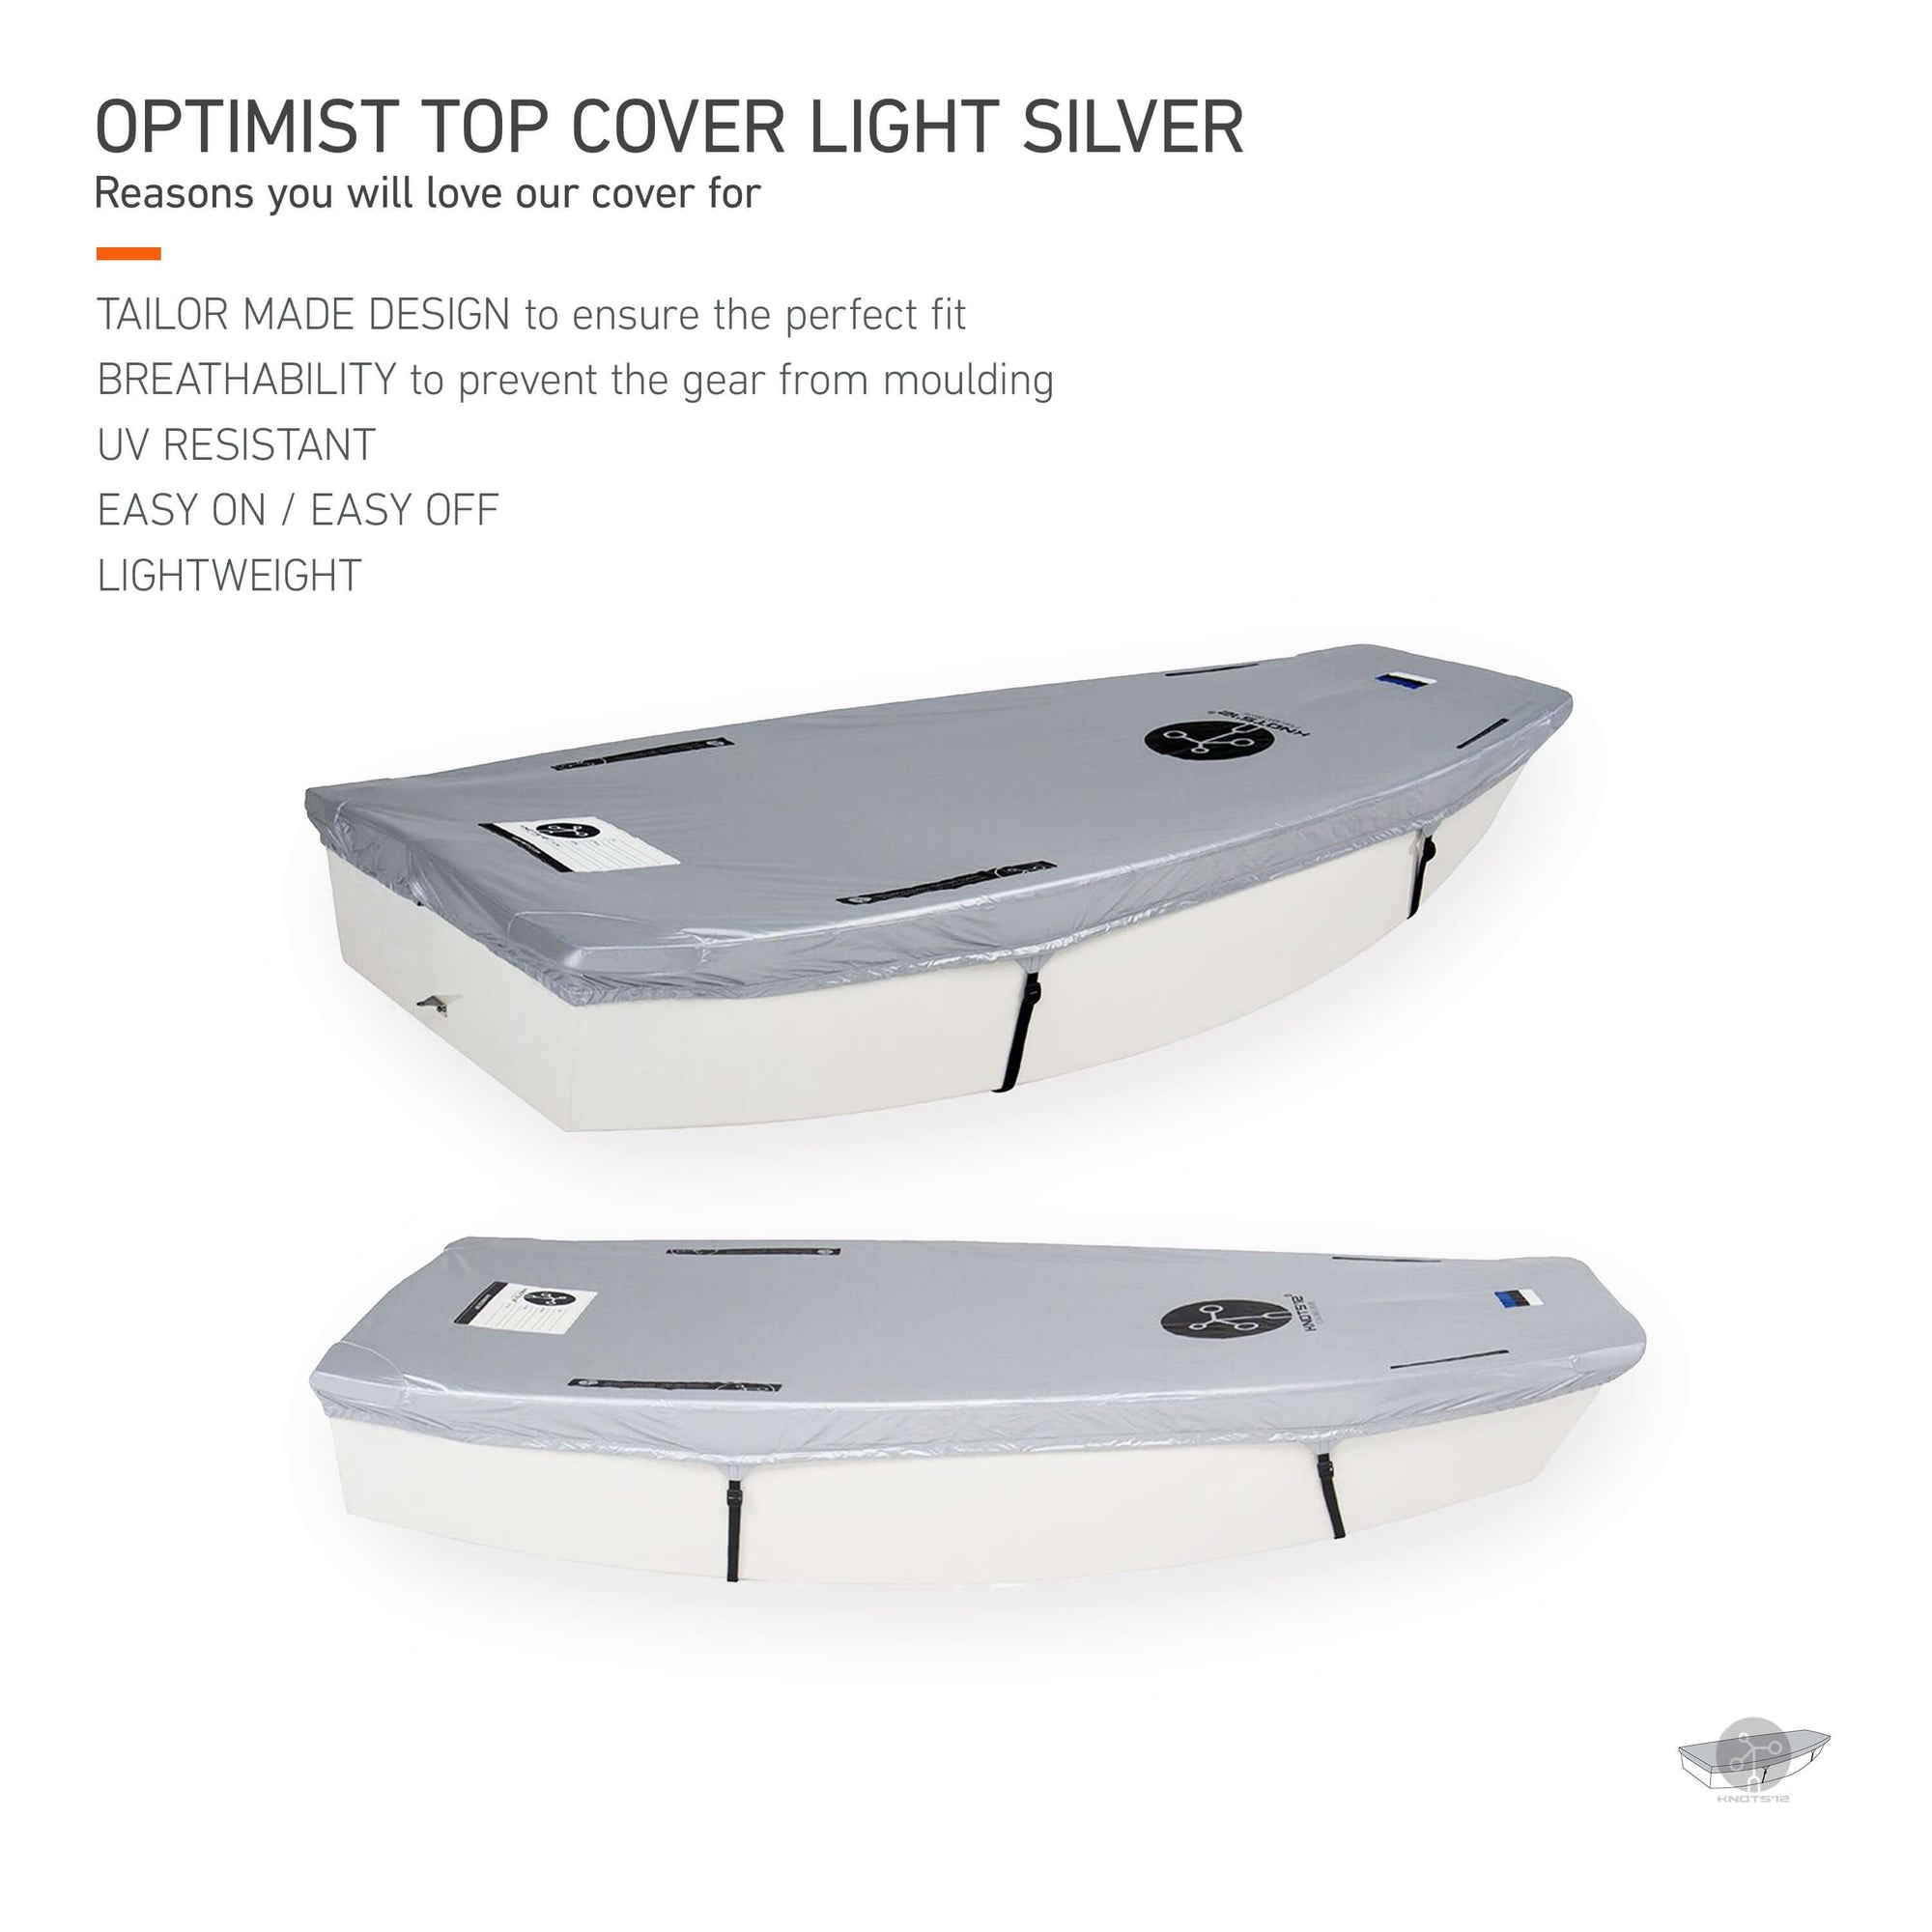 Knots12 Optimist dinghy top cover light silver. Reasons you will love our cover for: Tailor made design to ensure the perfect fit. Breathability to prevent the gear from moulding. UV resistant. Easy on, easy off. Lightweight. 